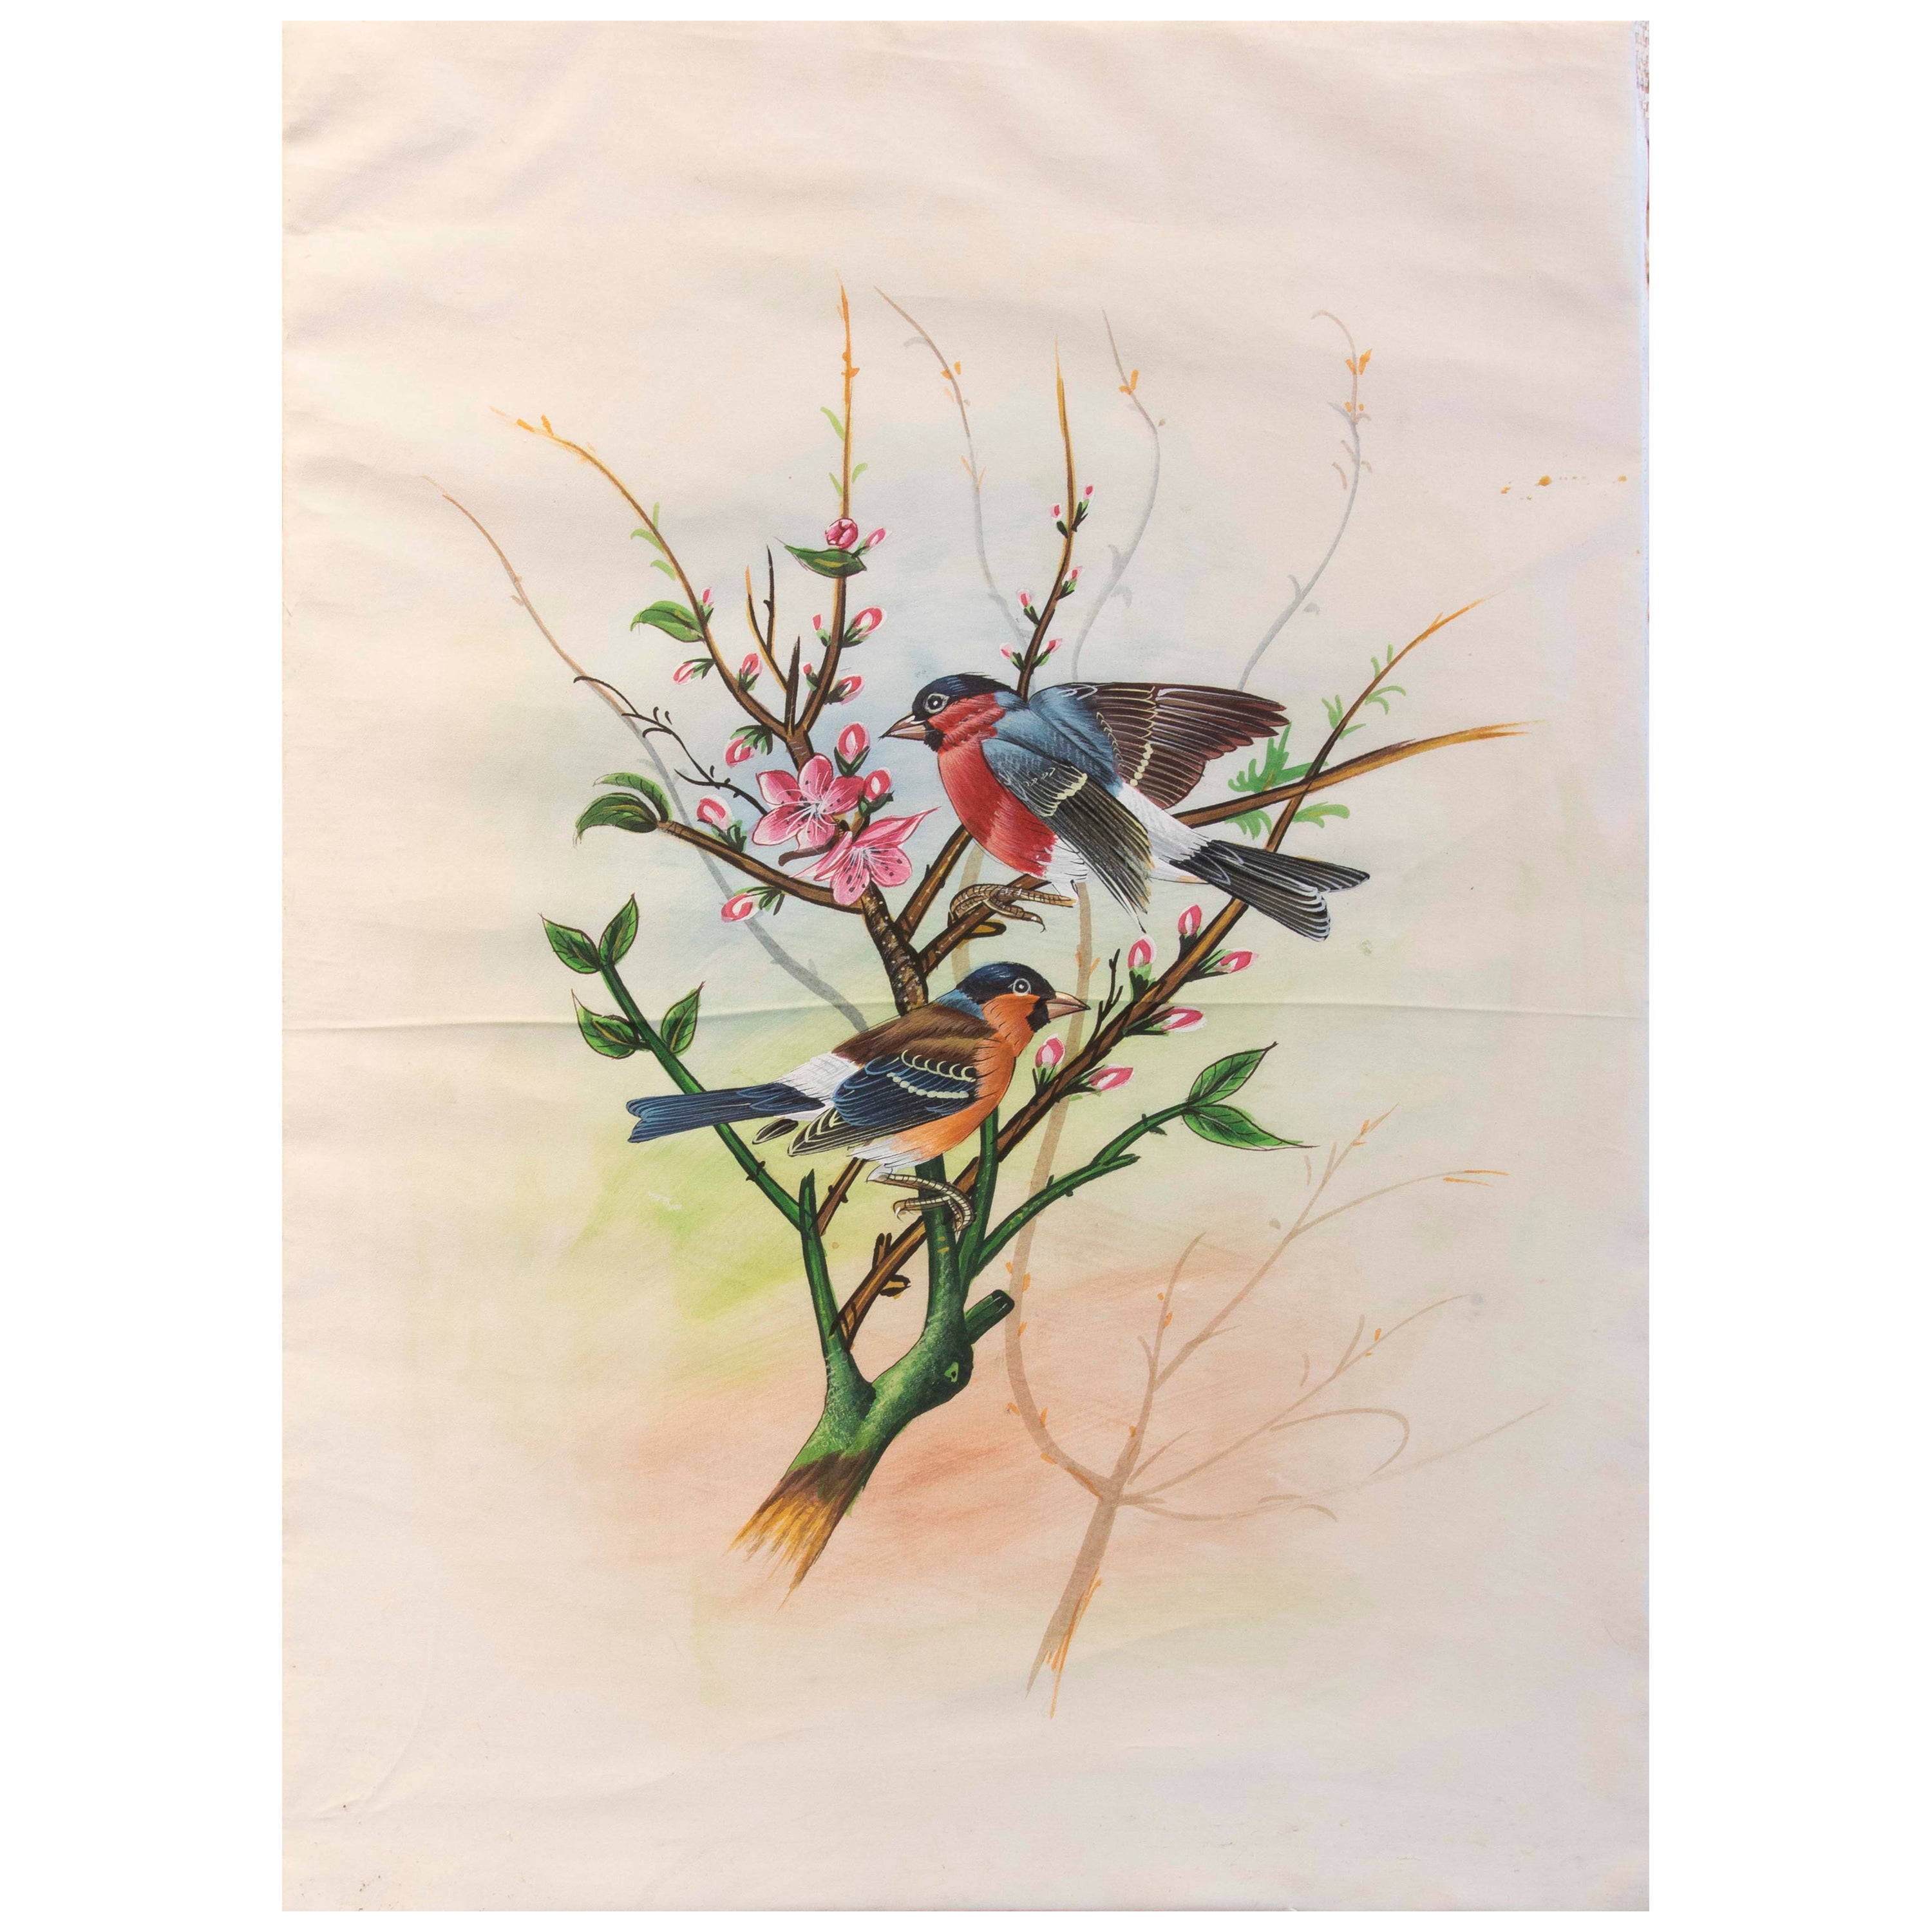 1970s Picture of B on Branch with Flowers Painted on Silk 